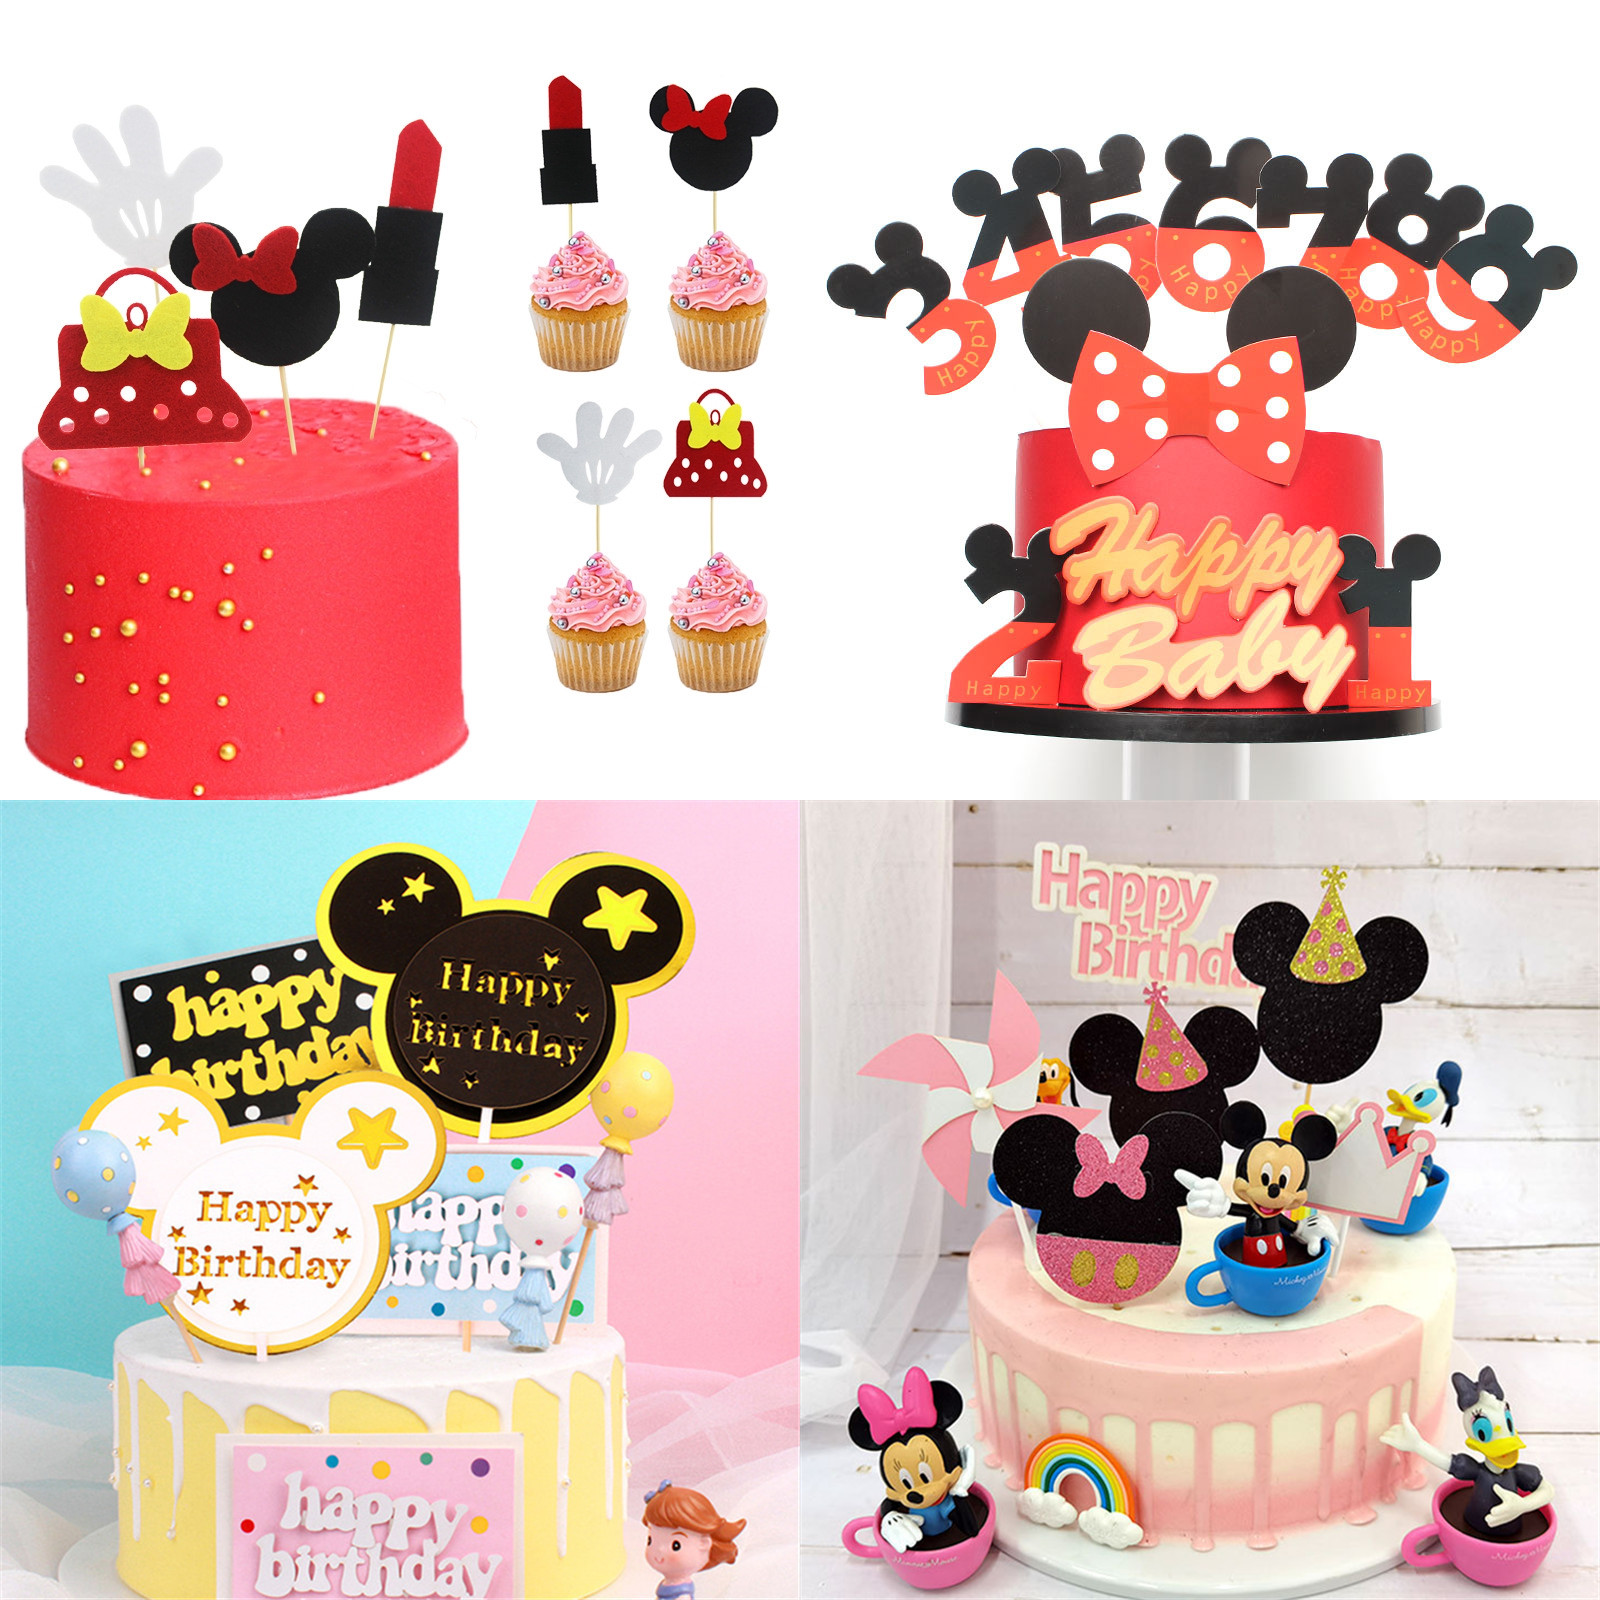 0 9 Number Happy Birthday Cake Topper Disney Mickey Minnie Mouse Cupcake Topper Party Supplies Decorations Shopee Philippines